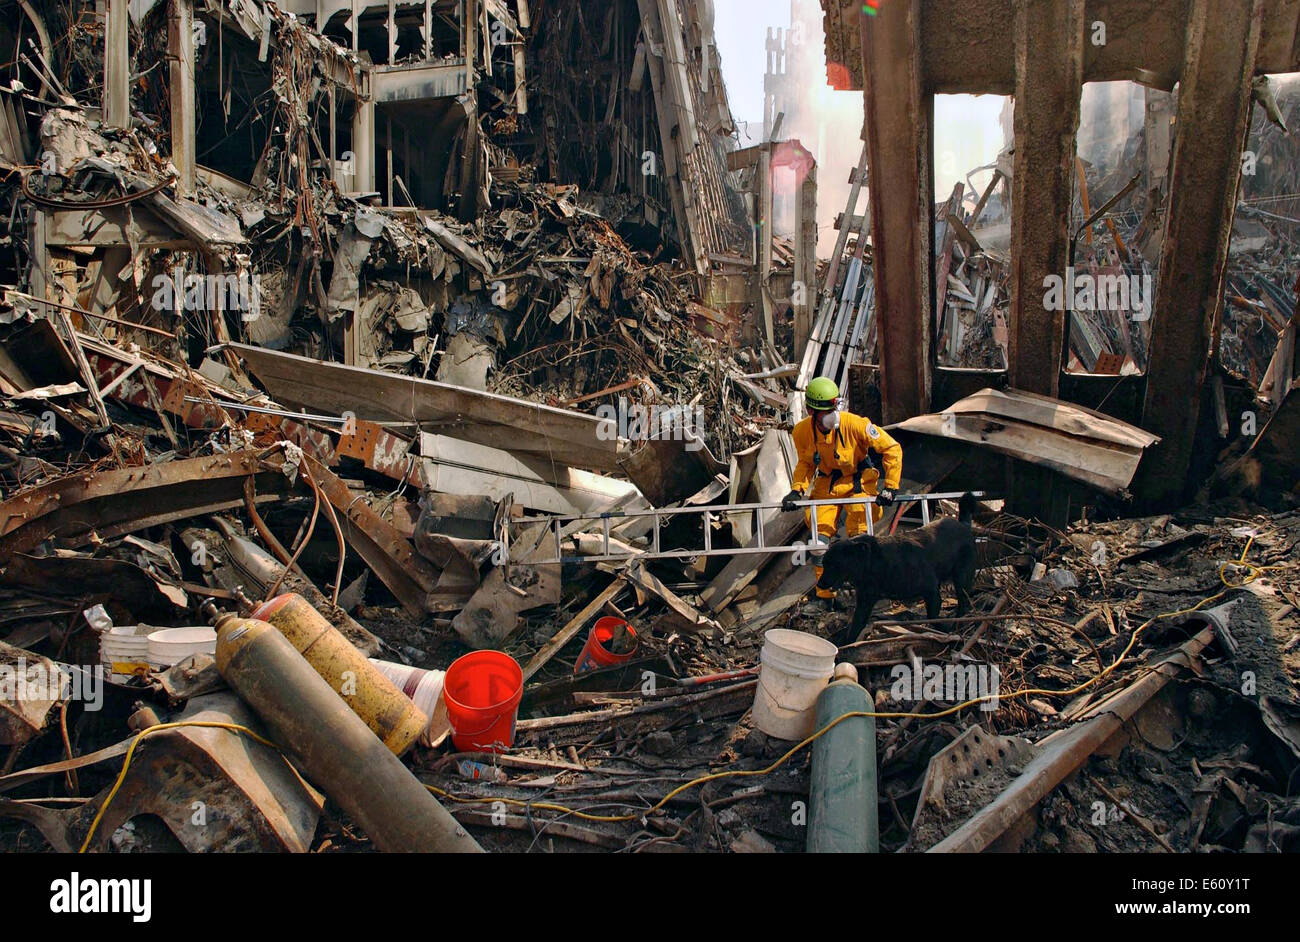 Rescue workers pick through debris and work with rescue dogs as they continue the recovery of victims amongst the wreckage of the World Trade Center in the aftermath of a massive terrorist attack which destroyed the twin towers killing 2,606 people September 17, 2001 in New York, NY. Stock Photo